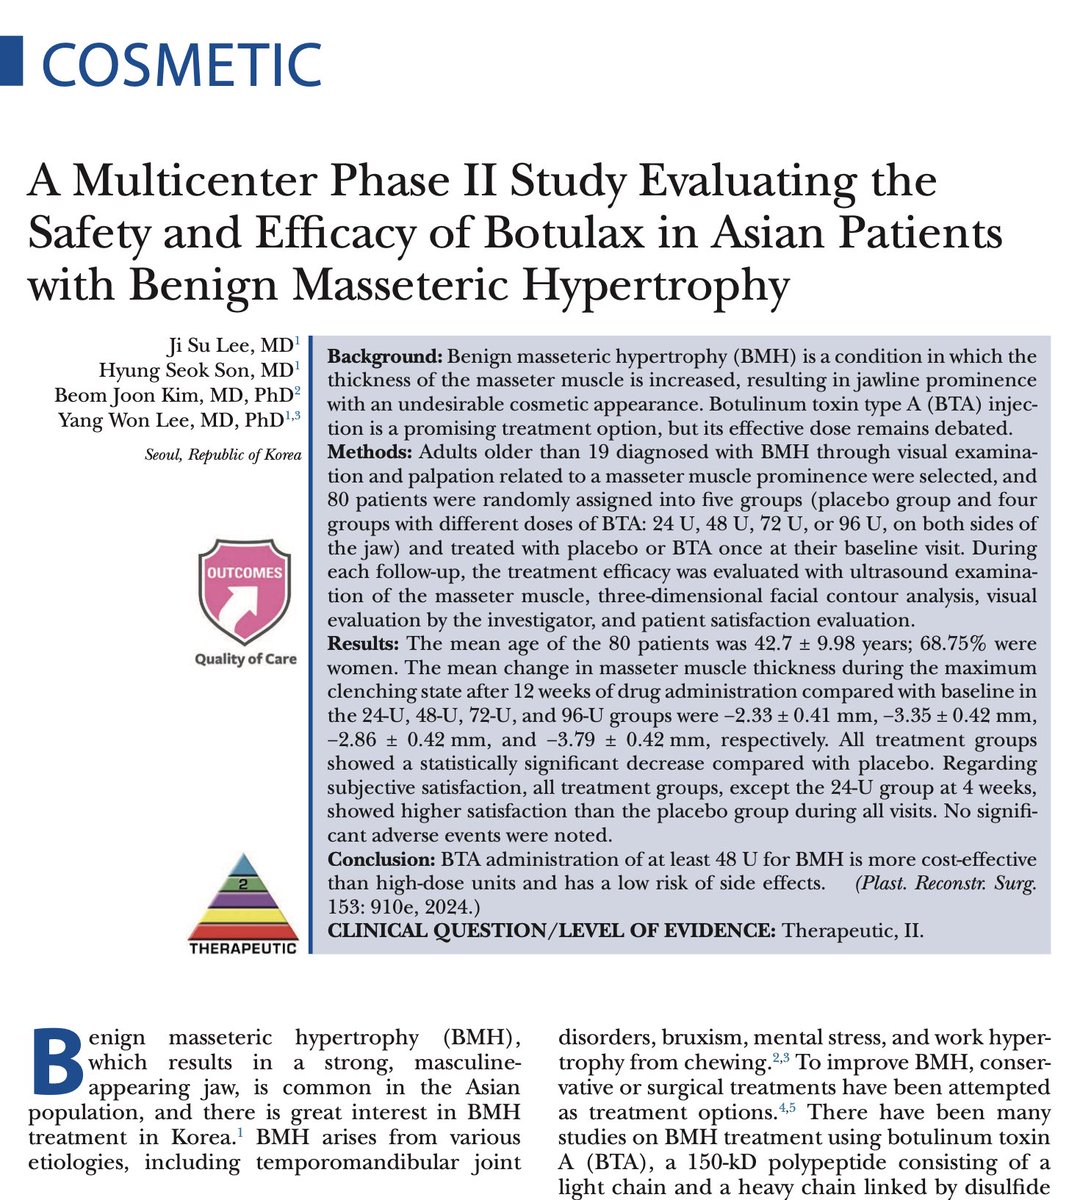 Another use of Botox to treat masseter hypertrophy in a clinical trial design. The authors determined the optimal dosage for this condition. Commendable effort by our colleagues from Korea. #PlasticSurgery @PRSJournal bit.ly/4aQcfHD